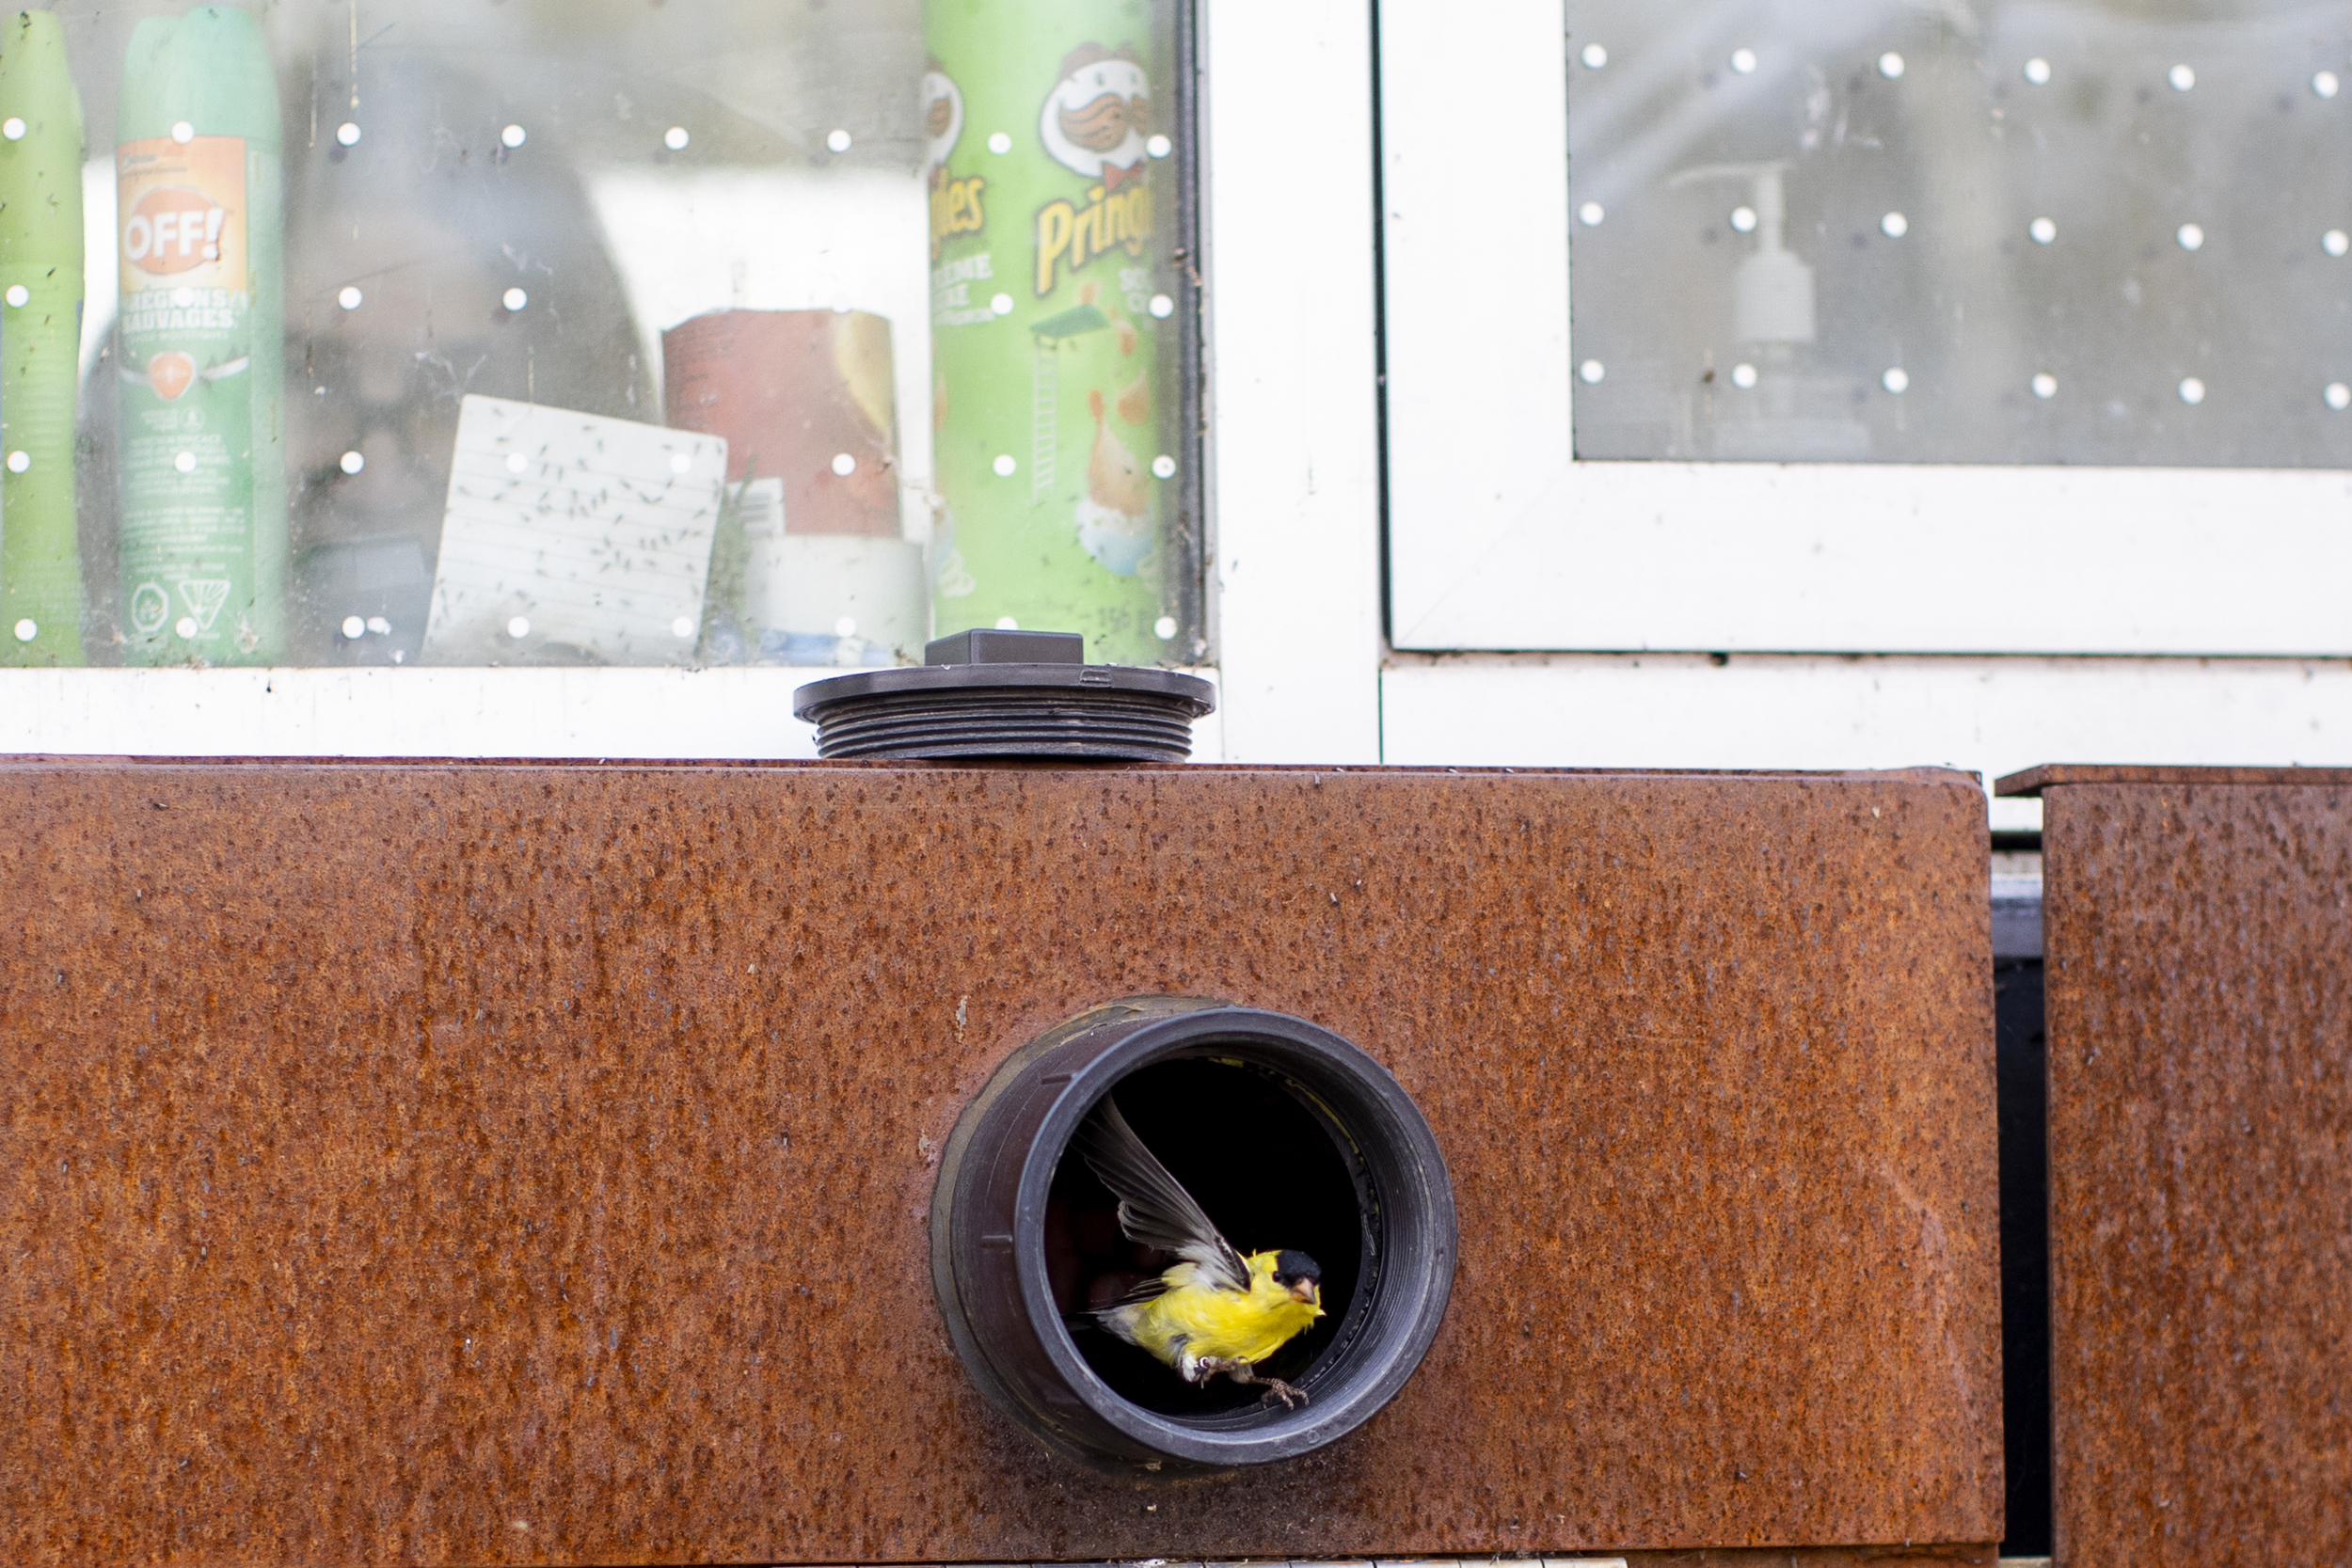 A yellow bird with white and black accents flies out of a tube leading out of a Tommy Thompson Park Bird Research Station building.